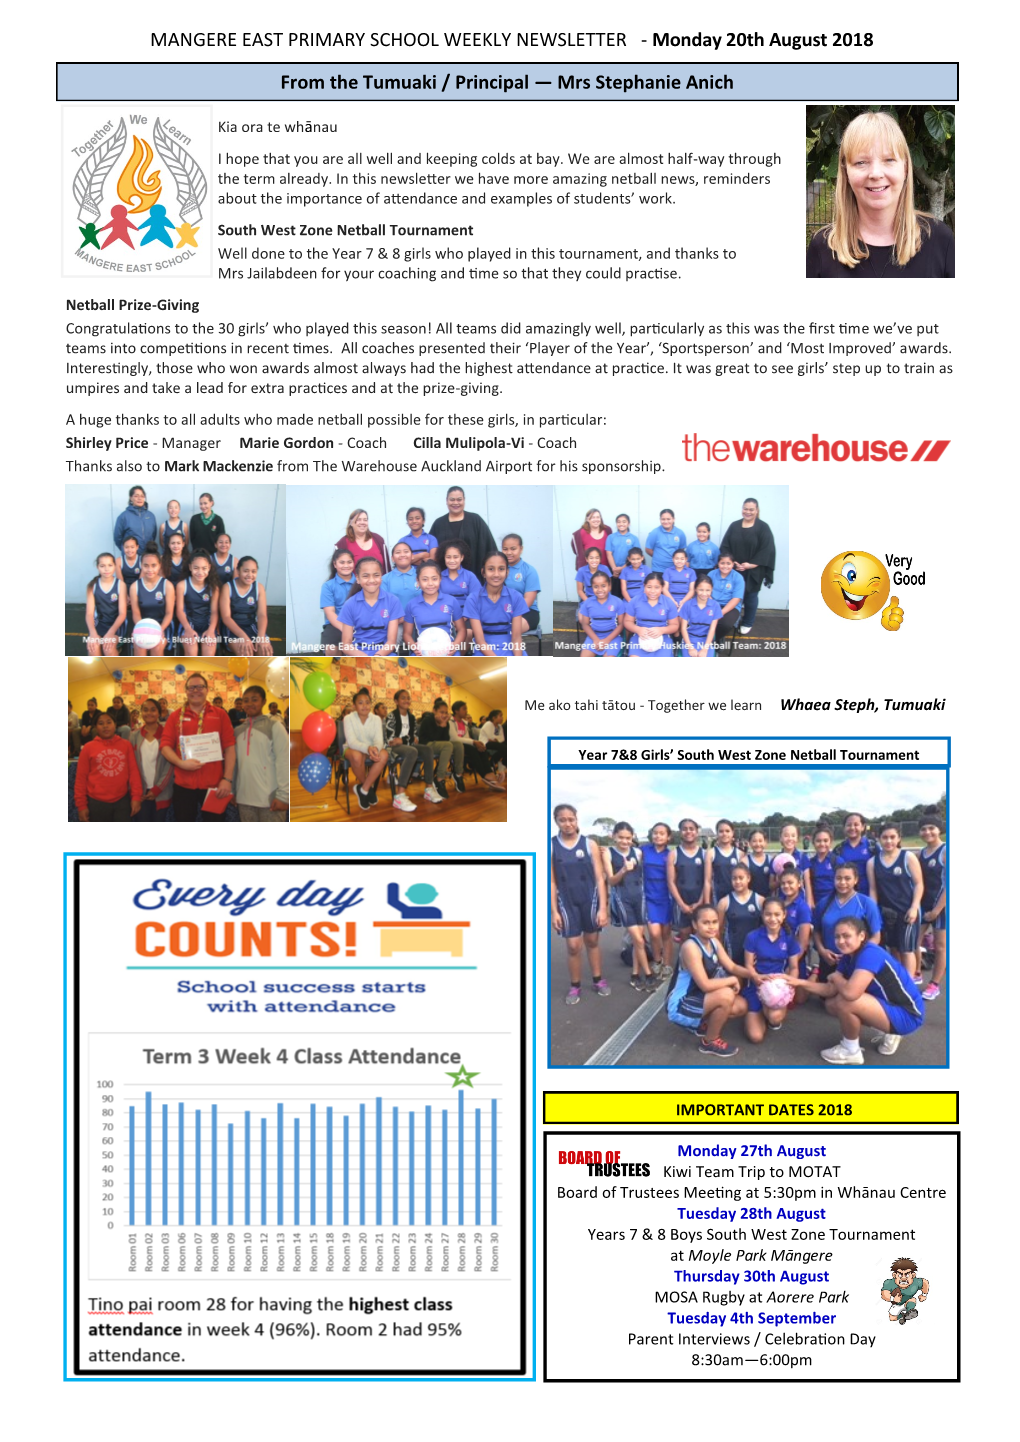 MANGERE EAST PRIMARY SCHOOL WEEKLY NEWSLETTER - Monday 20Th August 2018